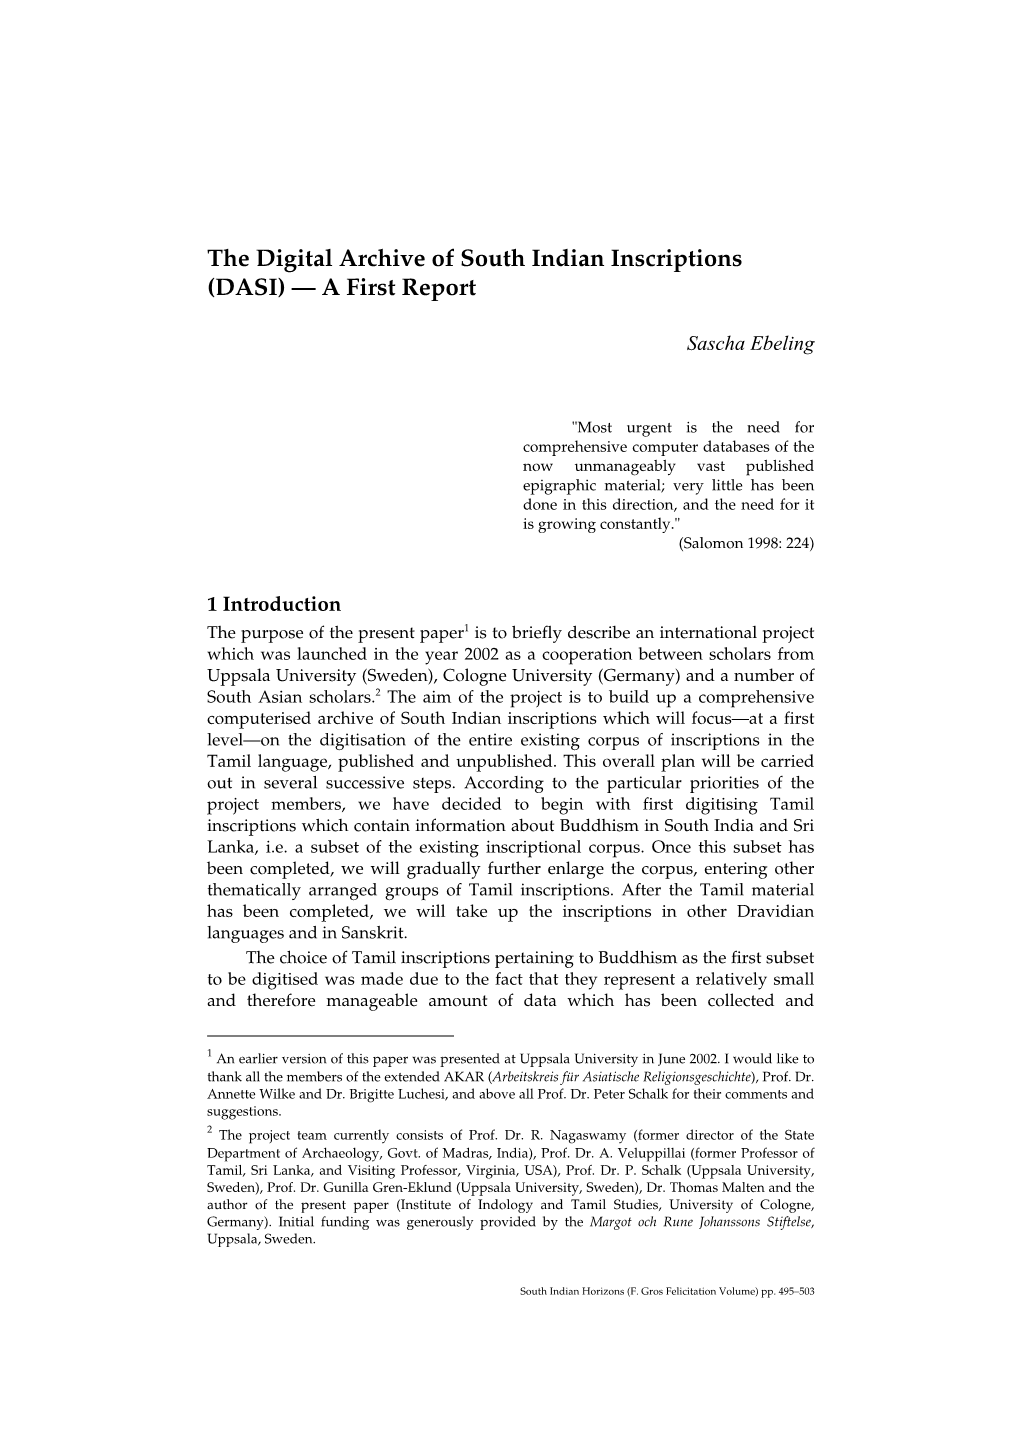 The Digital Archive of South Indian Inscriptions (DASI) — a First Report